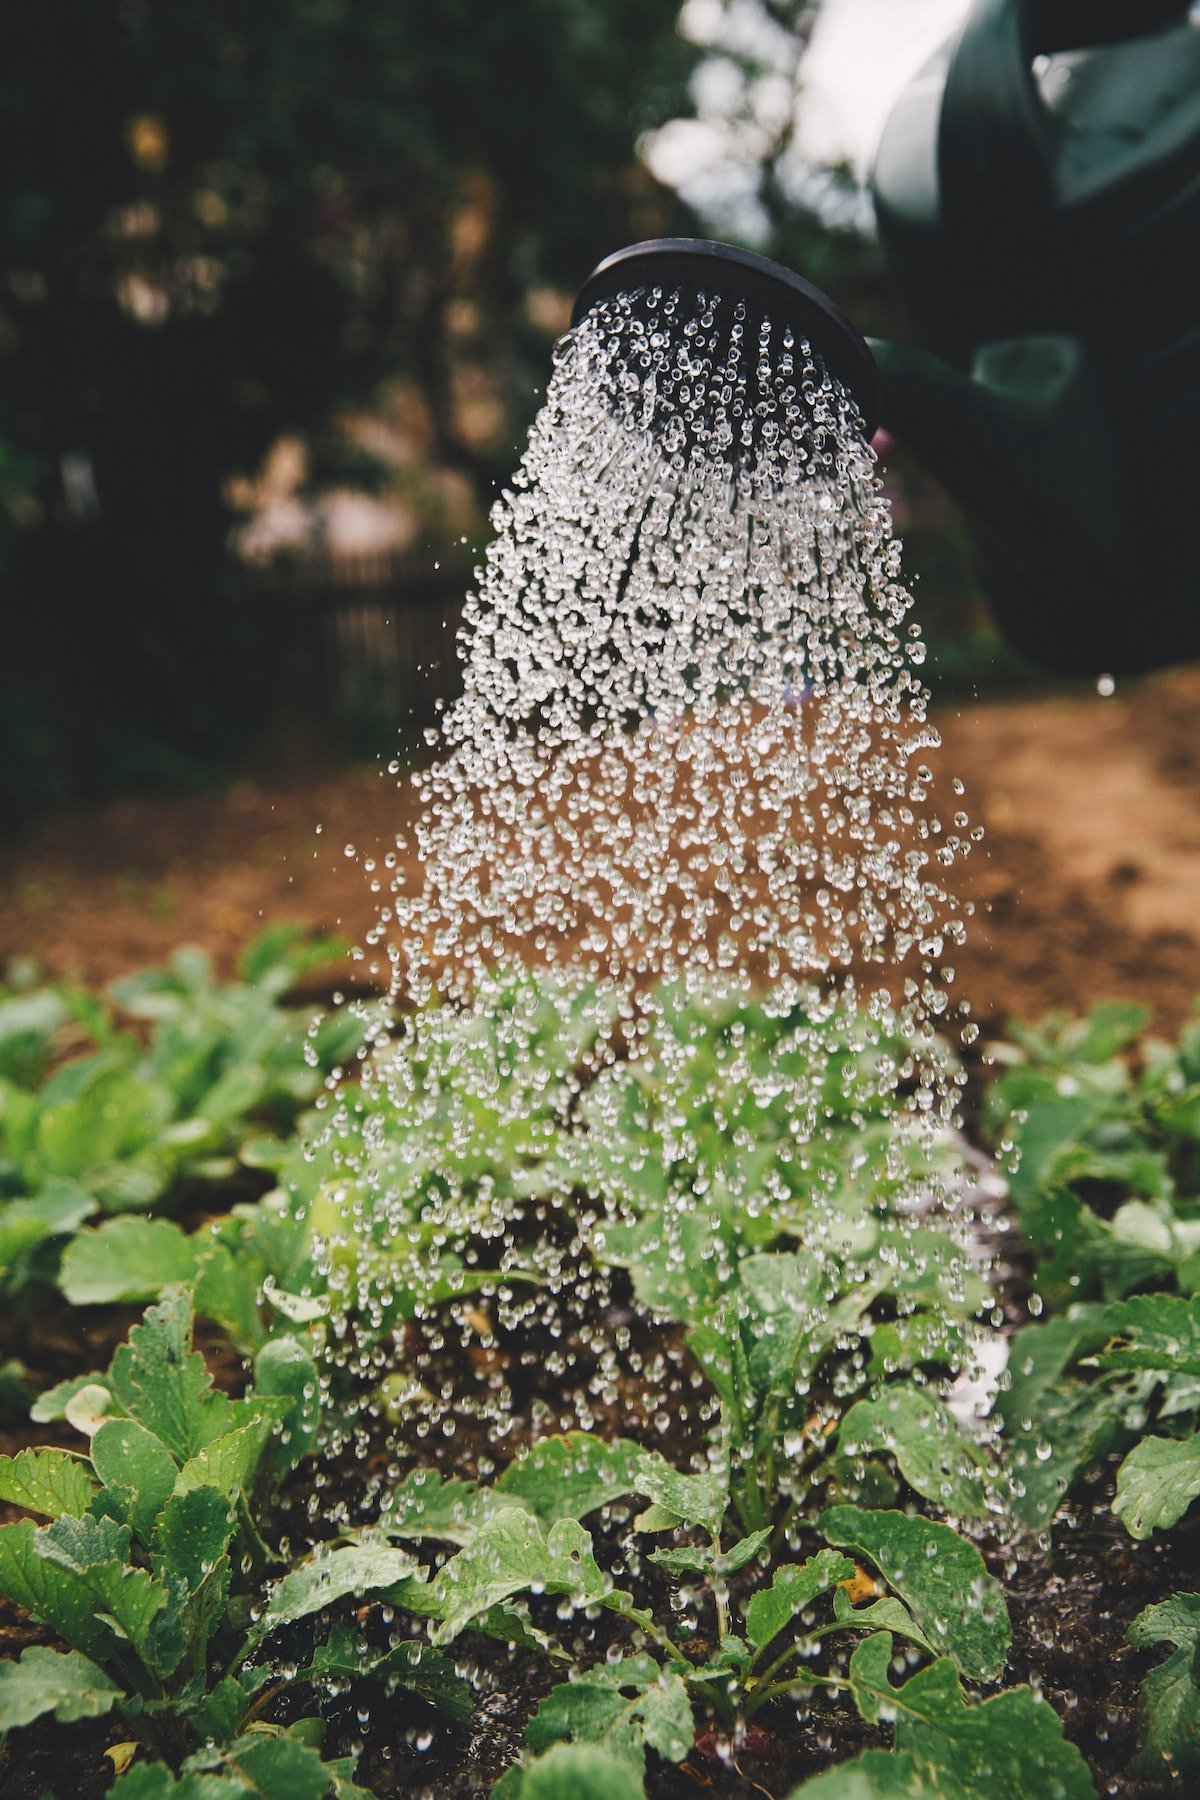 Sustainable gardening tips and ideas | Conserve water